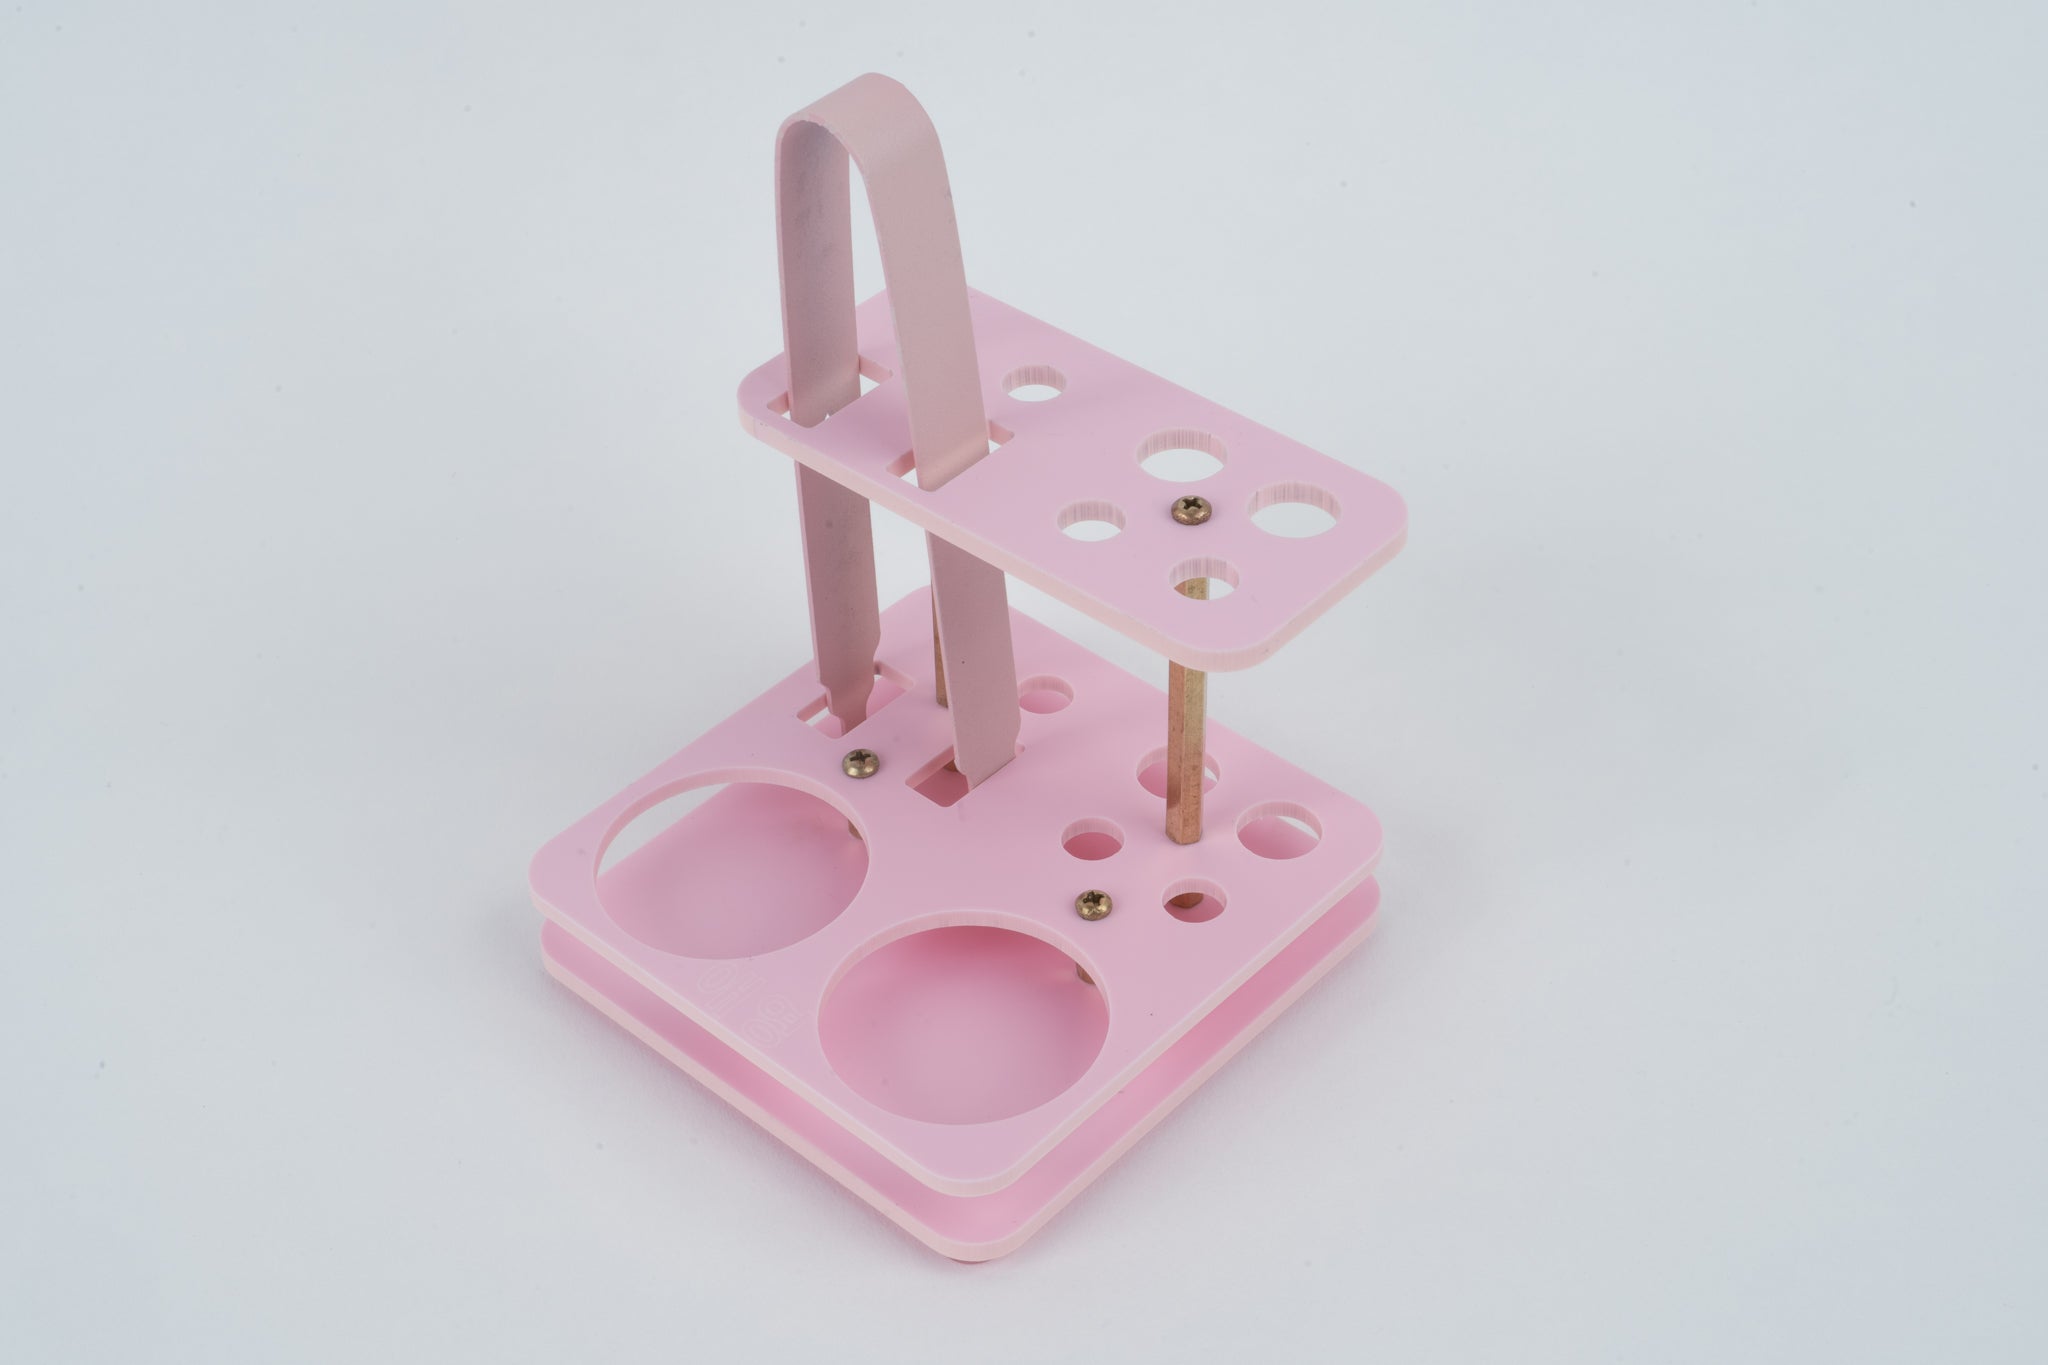 Cafe Aeyoung x SMKeyboards Tool Holder